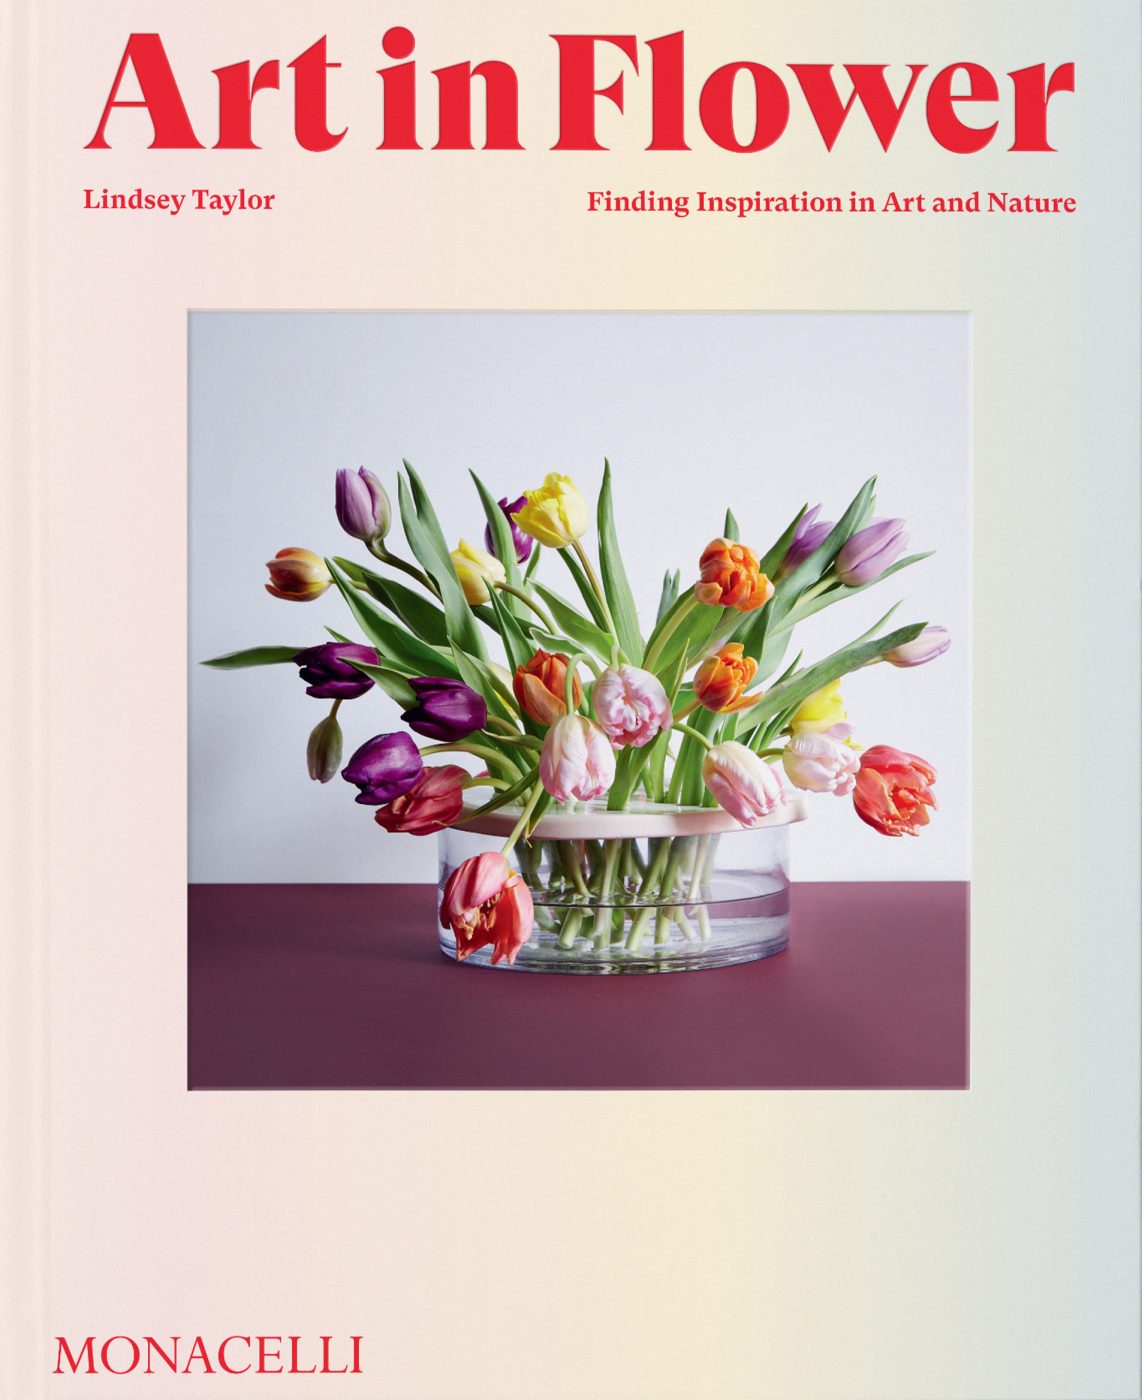 The book cover for "Art in Flower," by Lindsey Taylor